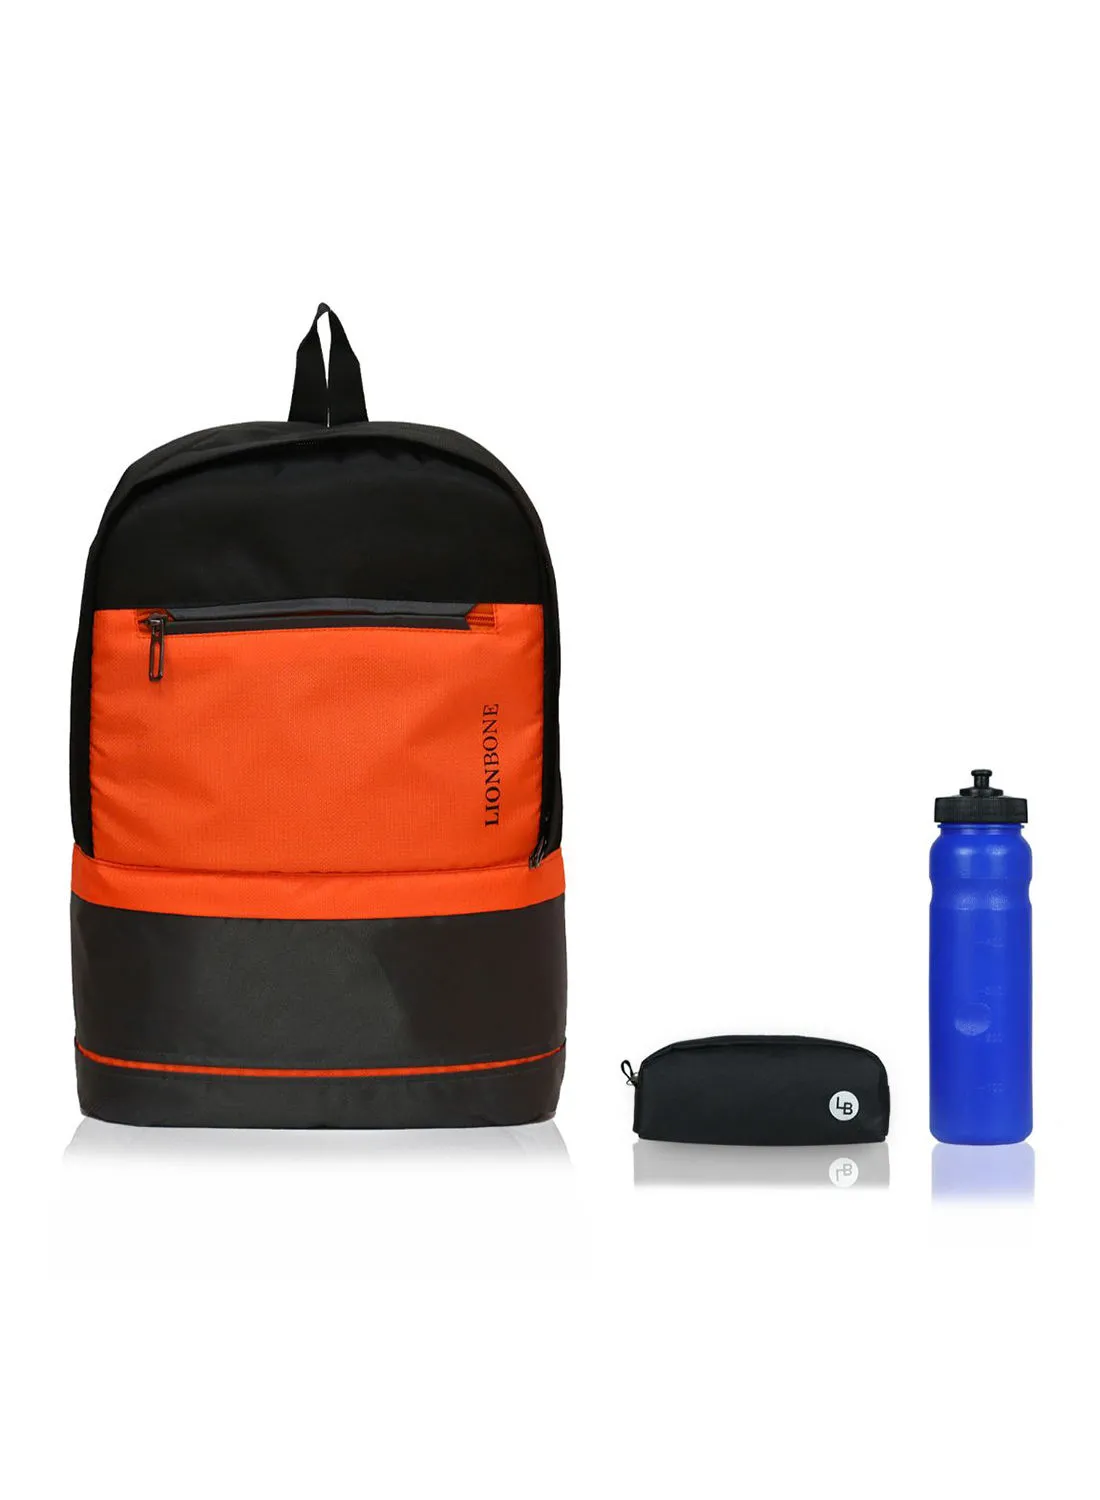 LIONBONE Combo of Polyester Backpack with zip closure compatible with 15' Laptop, Polyester Pouch and Plastic Sipper Orange/Grey/Black